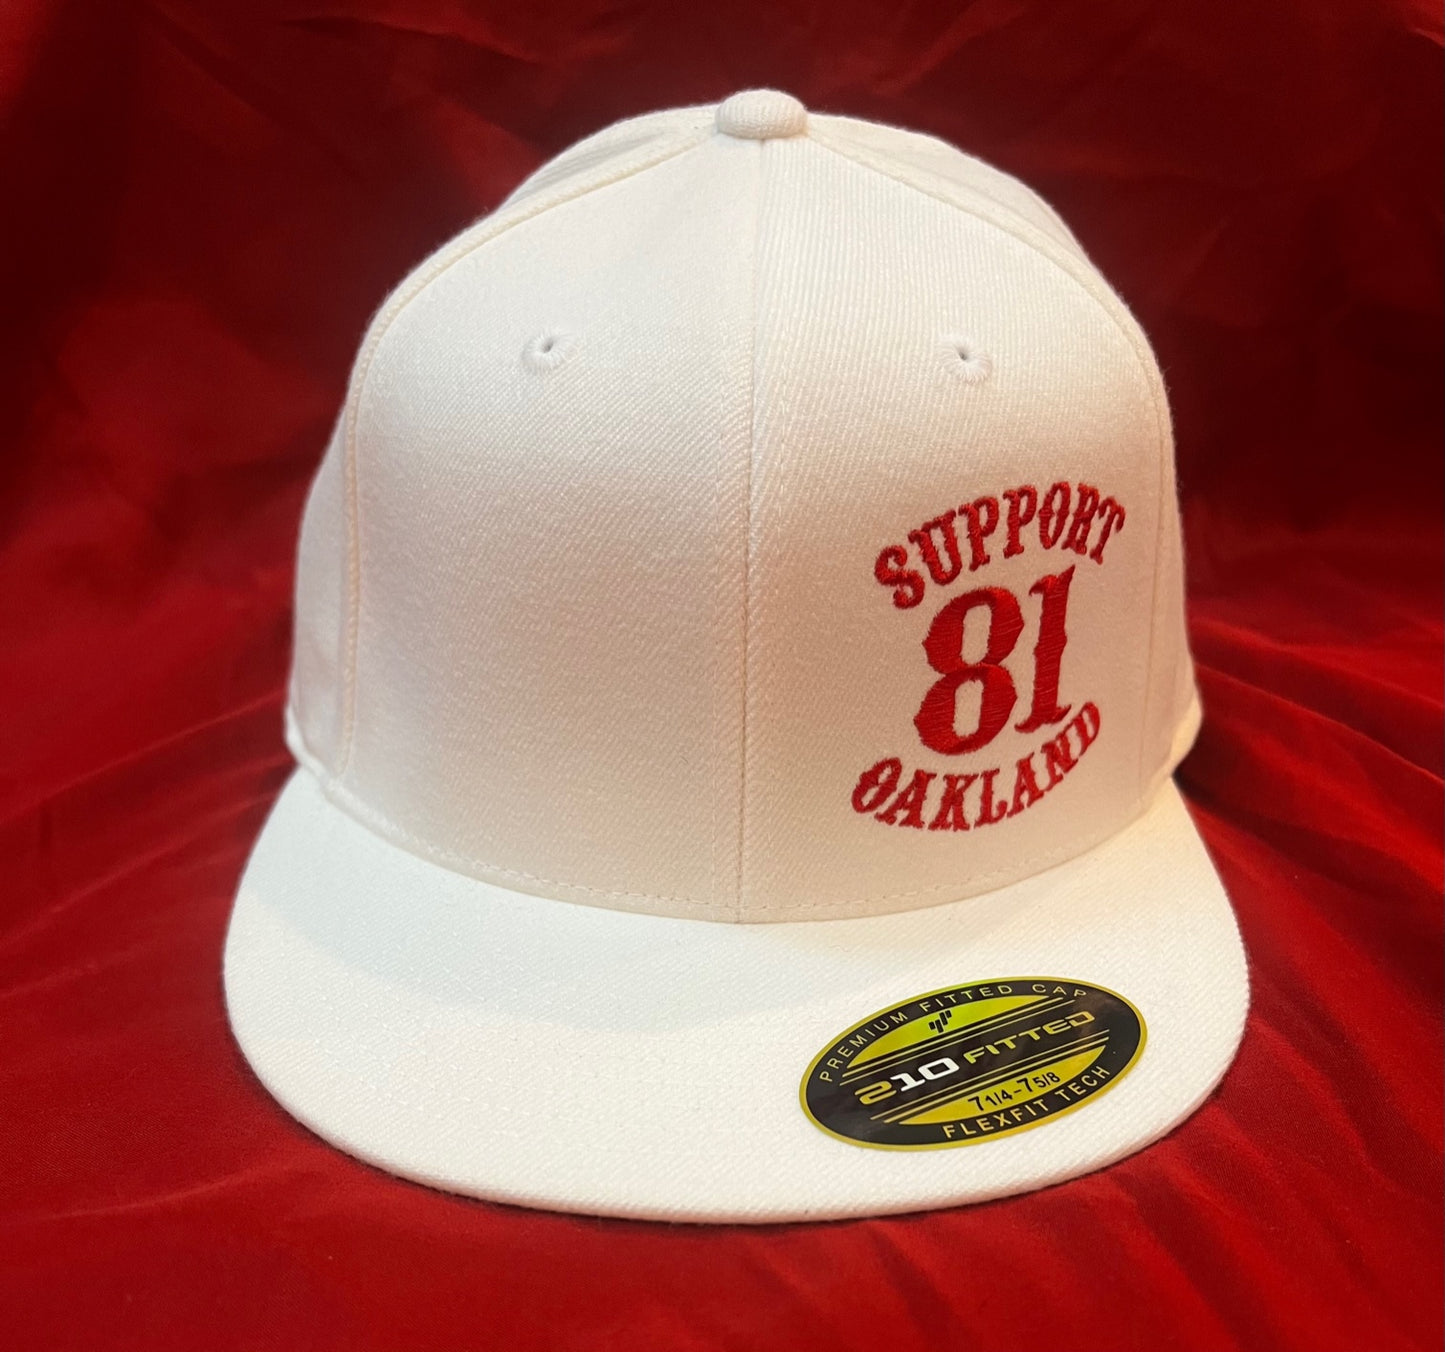 2 COLORS AVAILABLE- SUPPORT 81 OAKLAND HAT